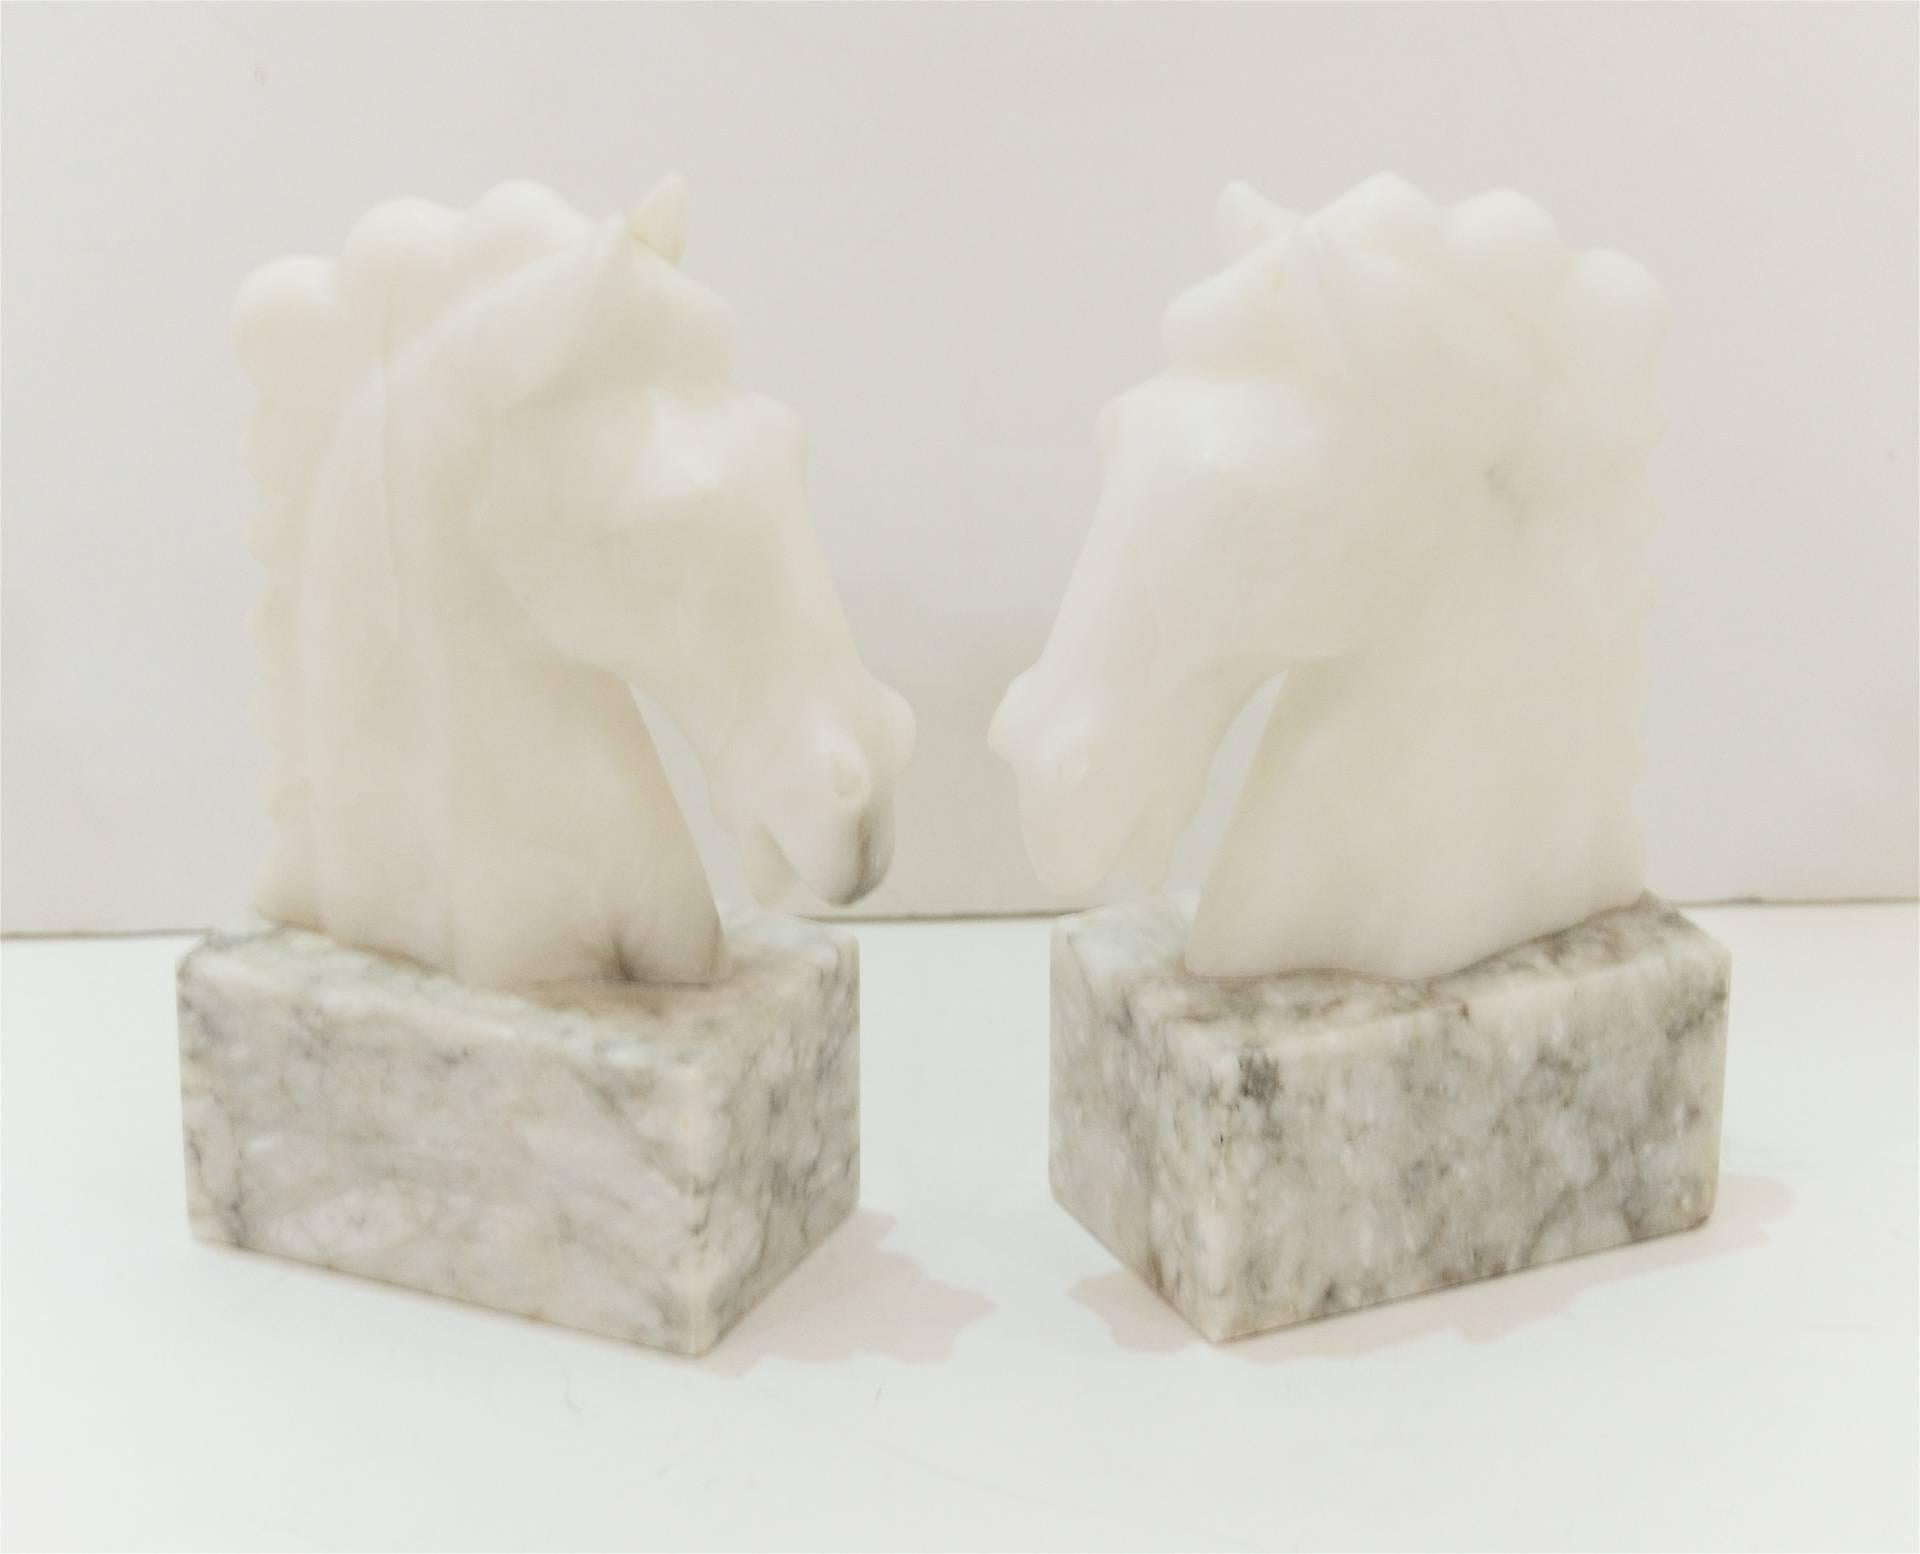 Pair of carved marble horse head bookends.